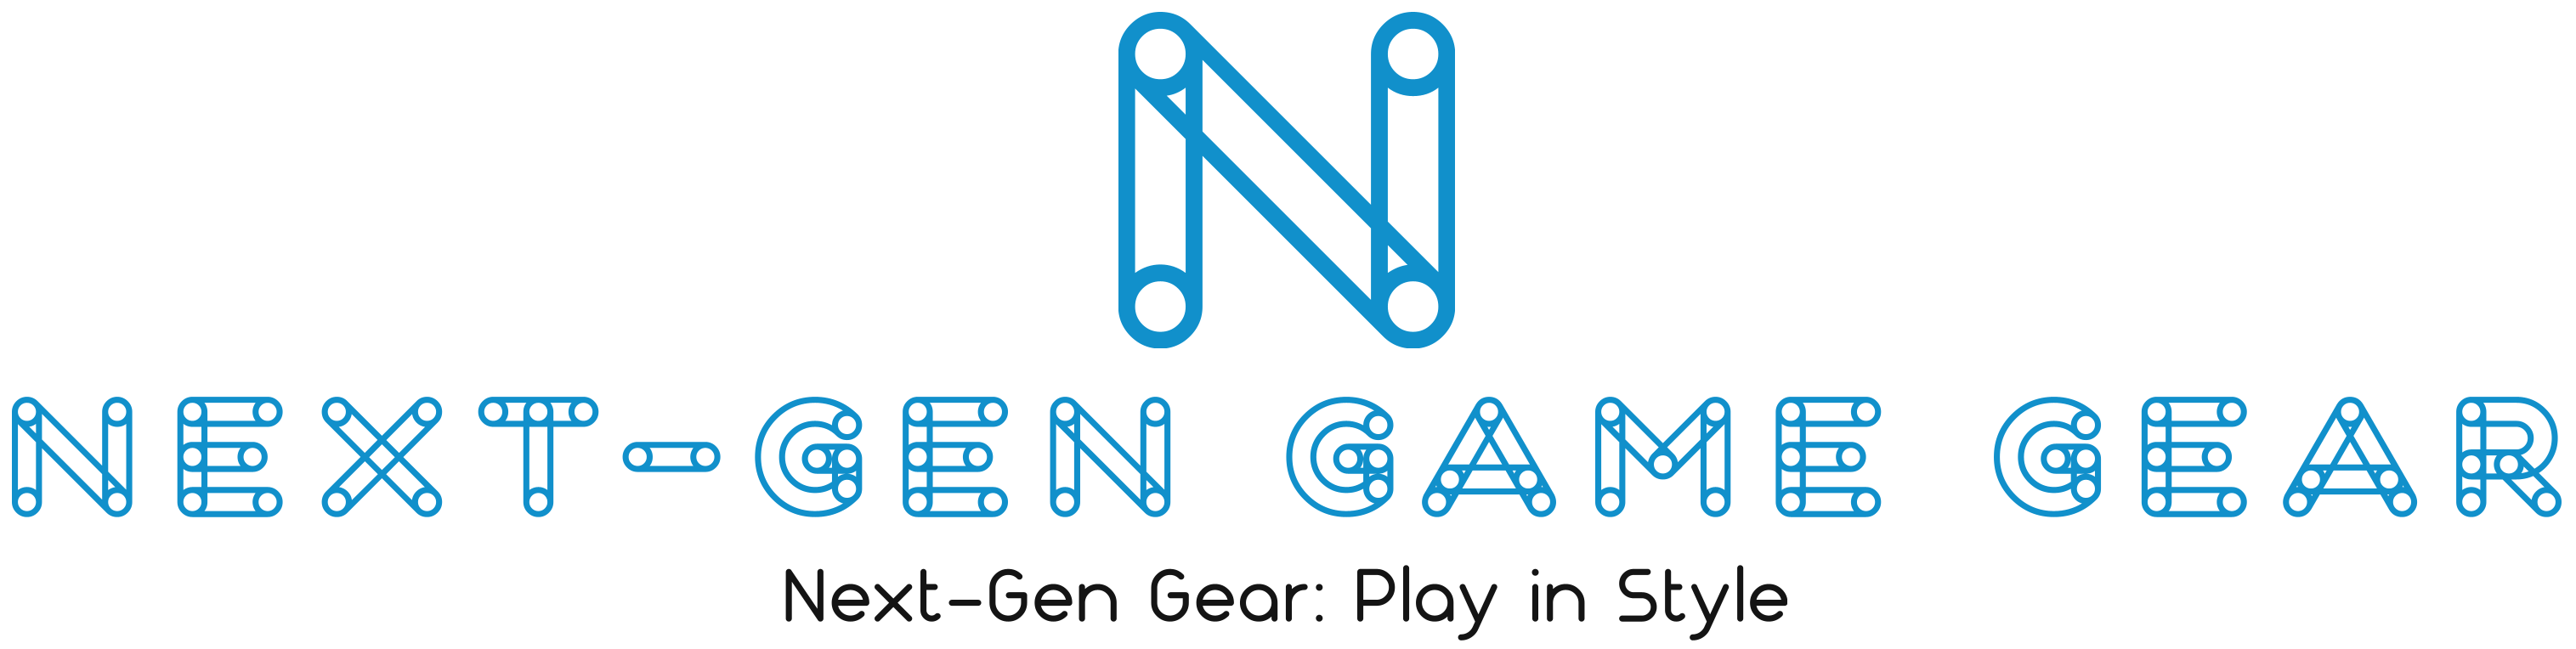 10% Off With Next-Gen Game Gear Coupon Code